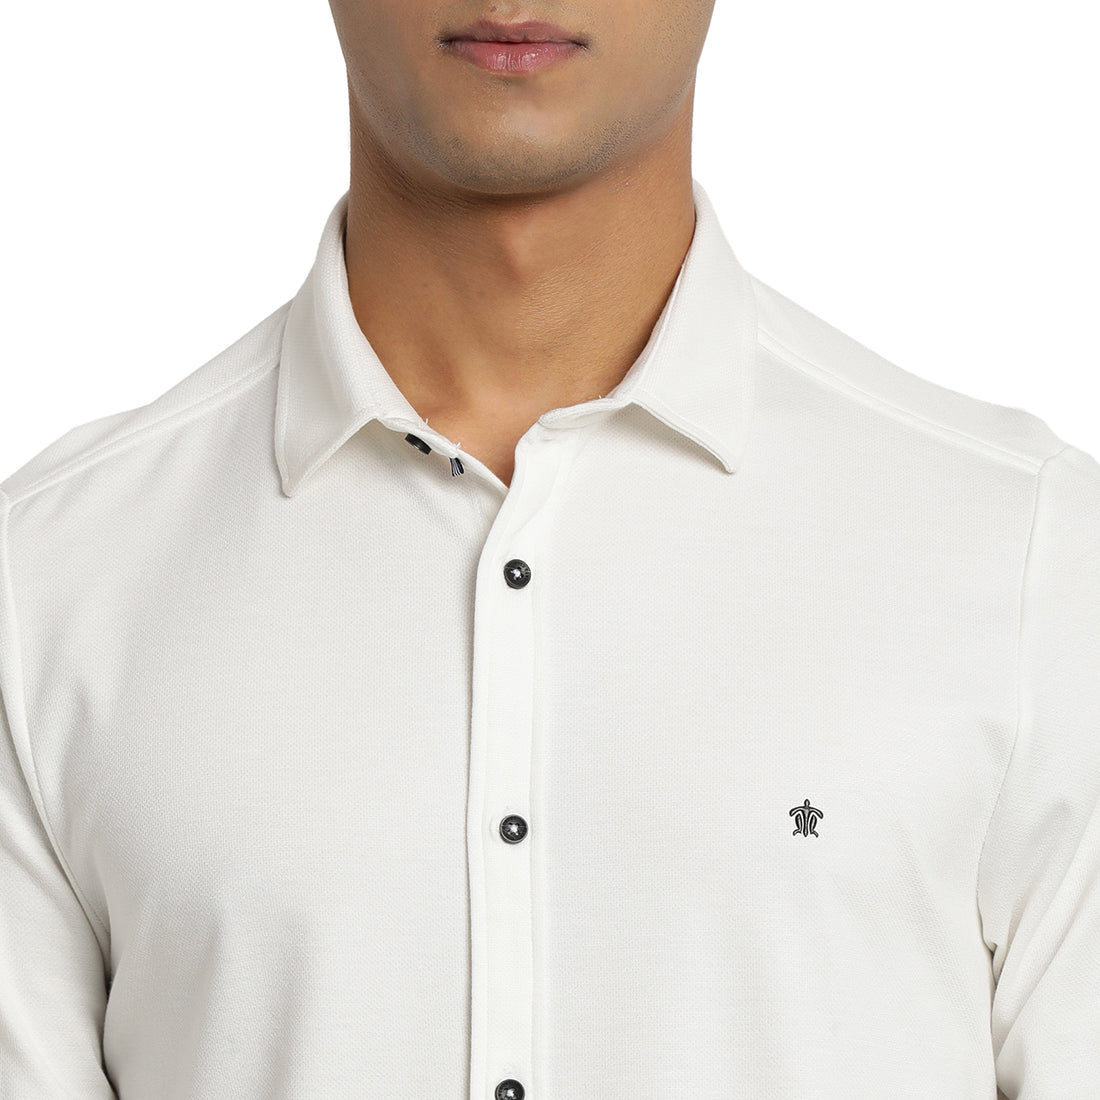 Turtle Men White Knitted Printed Slim Fit Casual Shirts